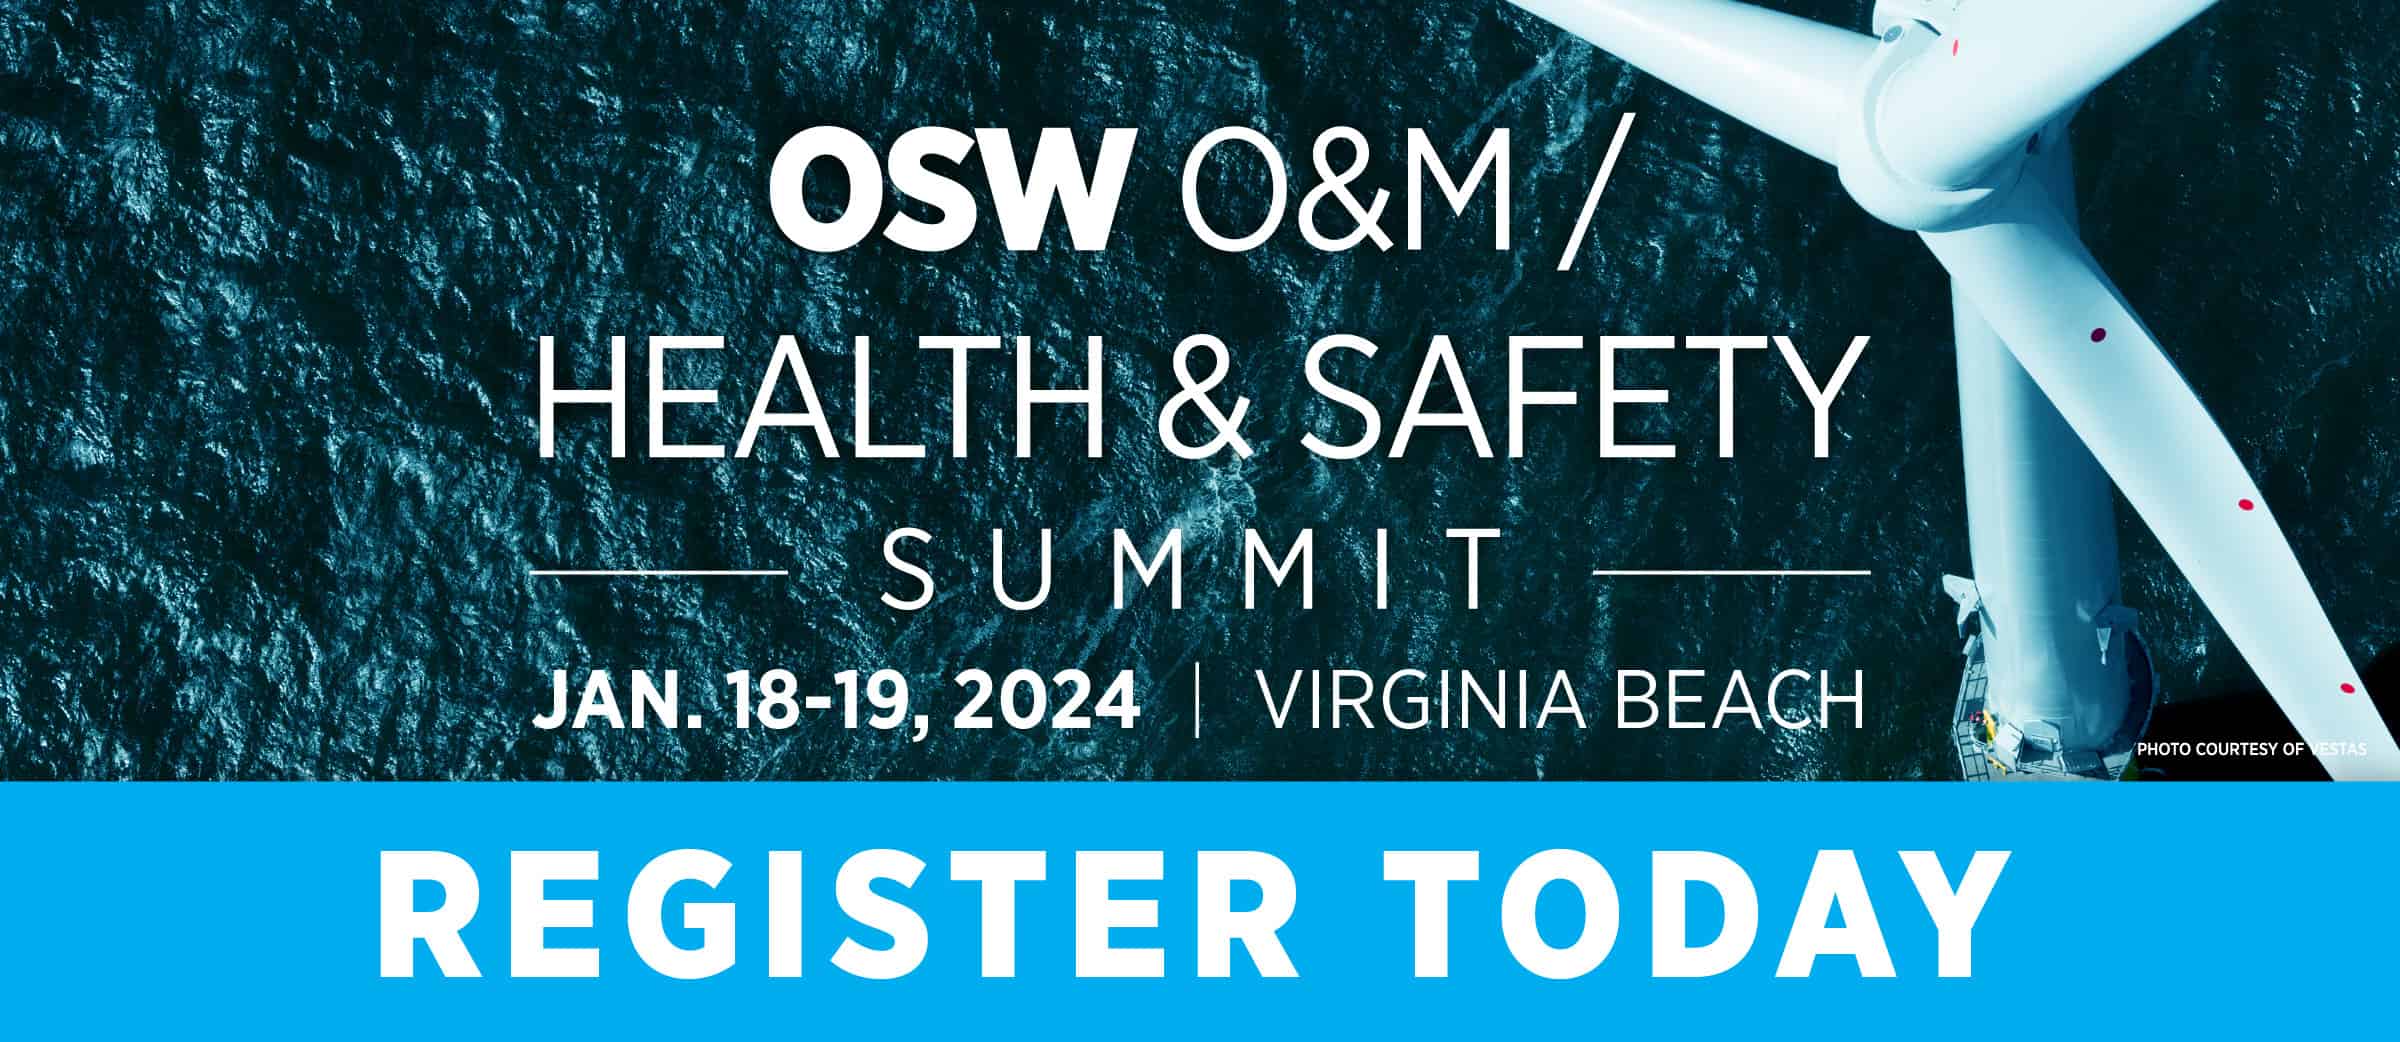 O&M / Health Safety Summit Register Today